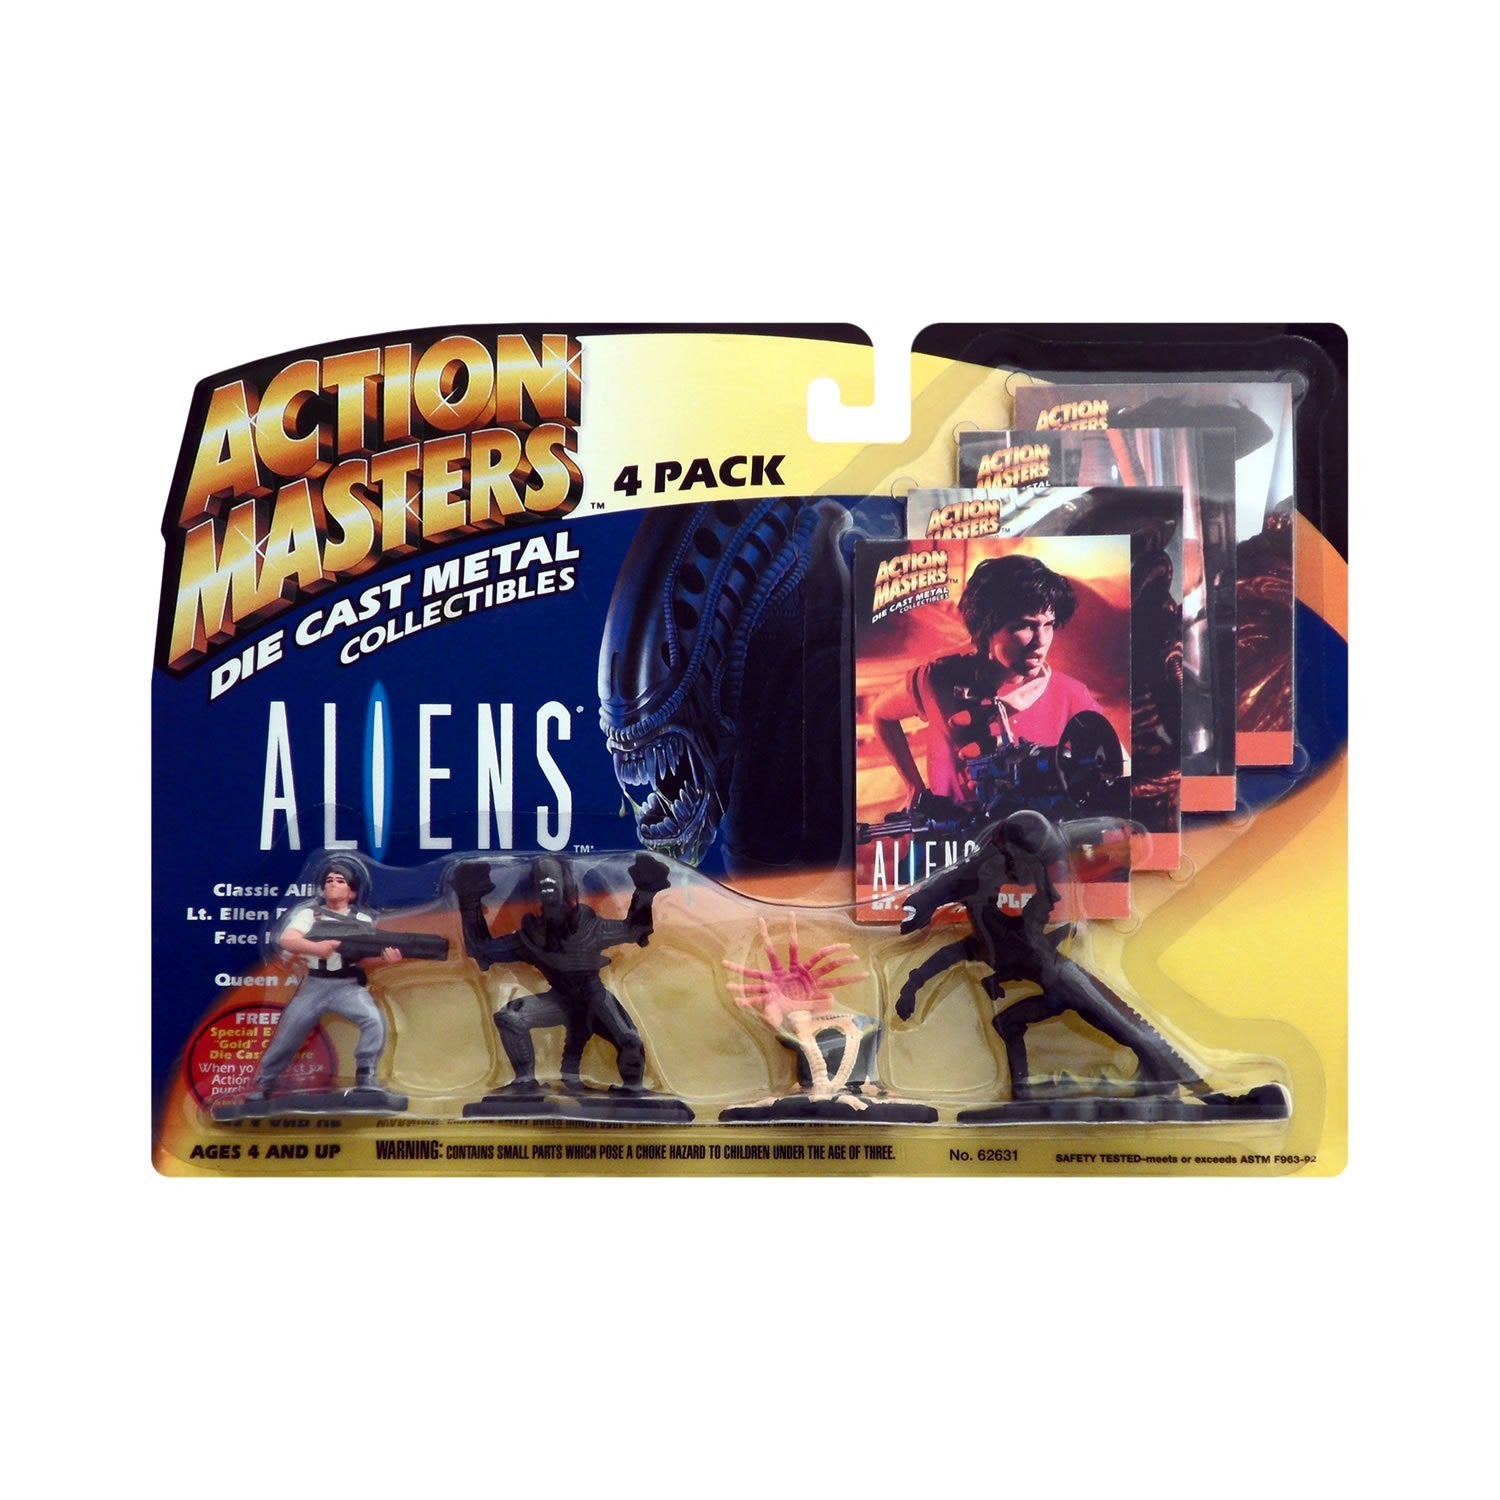 Aliens Die Cast Metal Collectibles 4 Pack + Trading Cards Hasbro Action Masters 1994